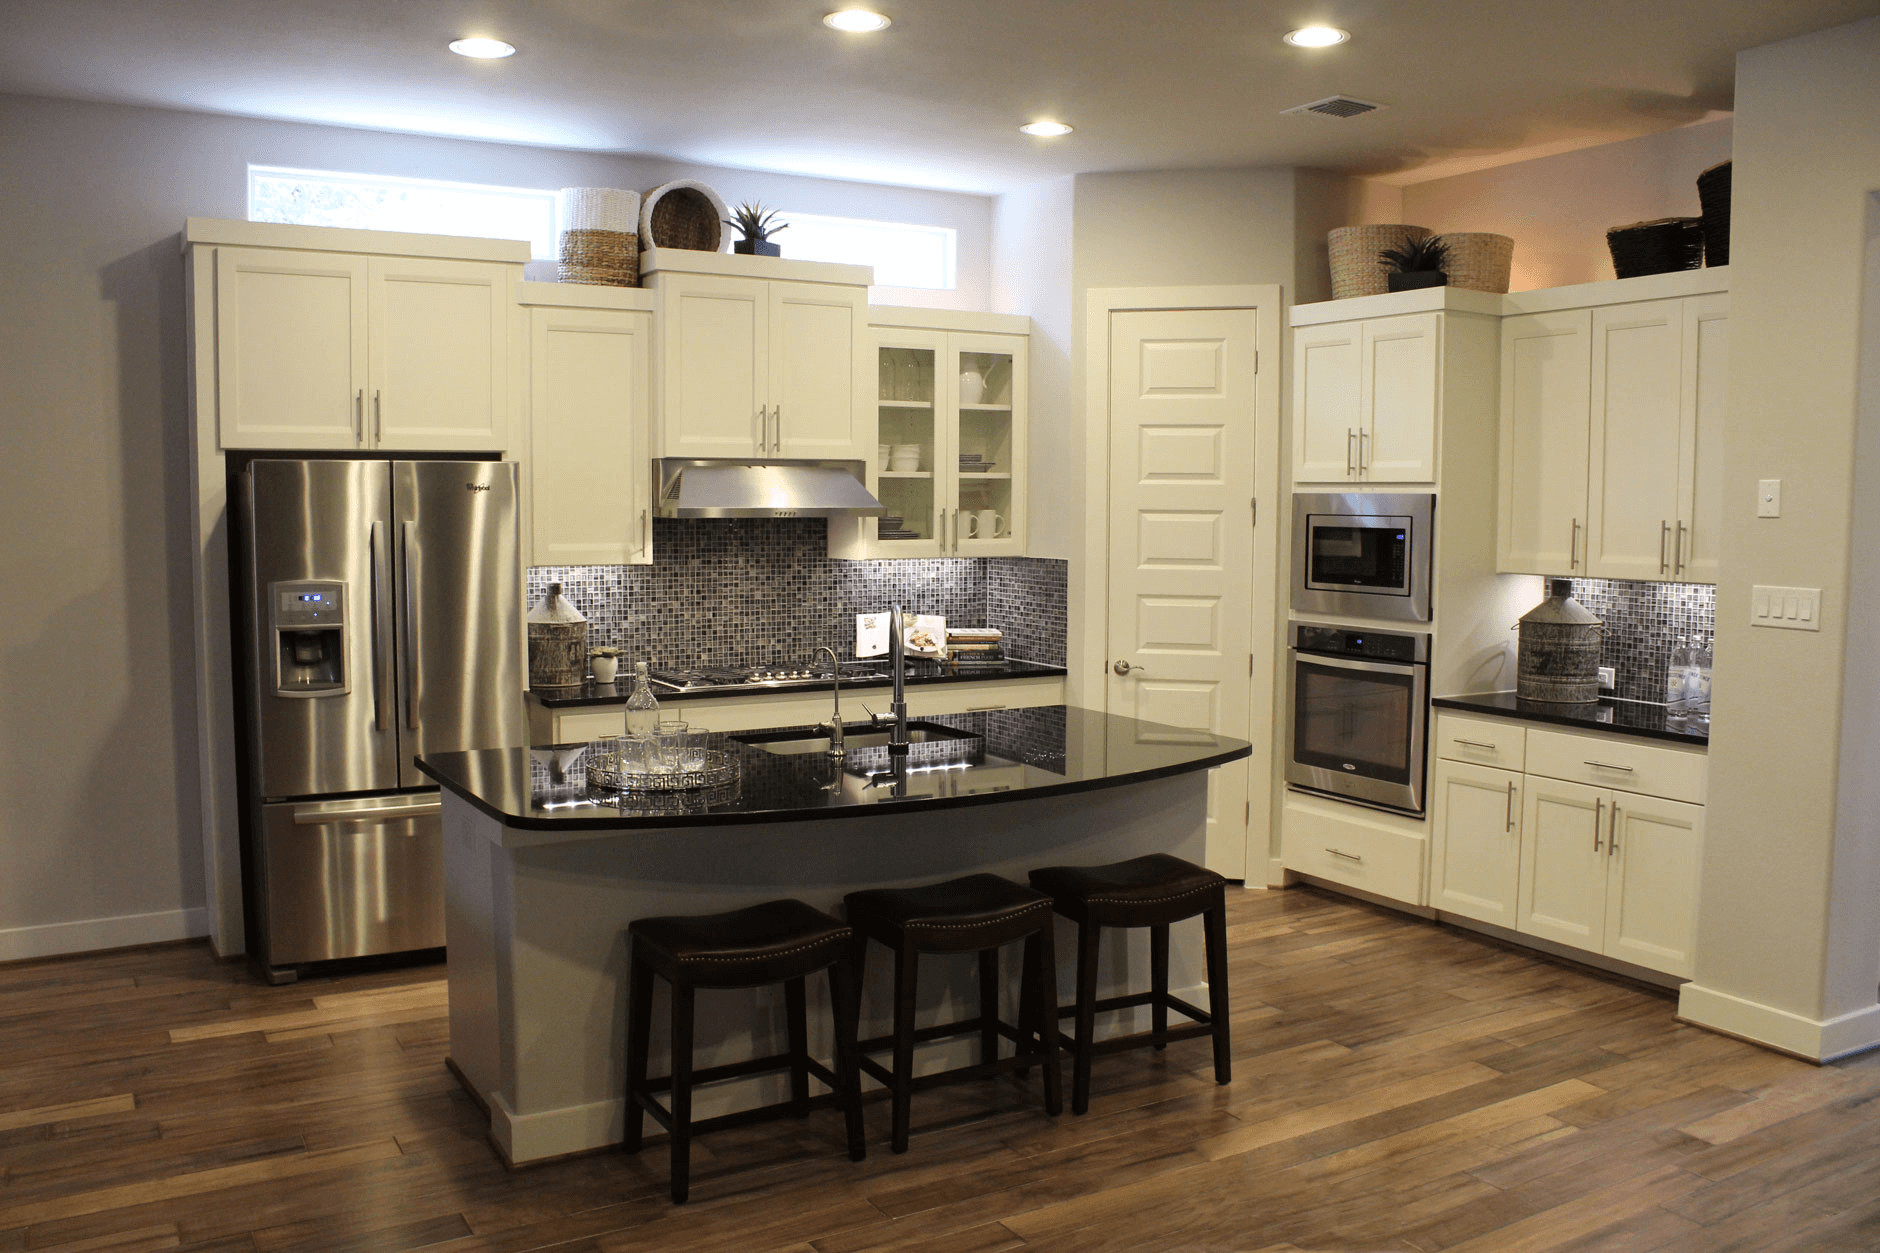 Kitchen Cabinet With Counter
 How to Match Kitchen Cabinet Countertops and Flooring